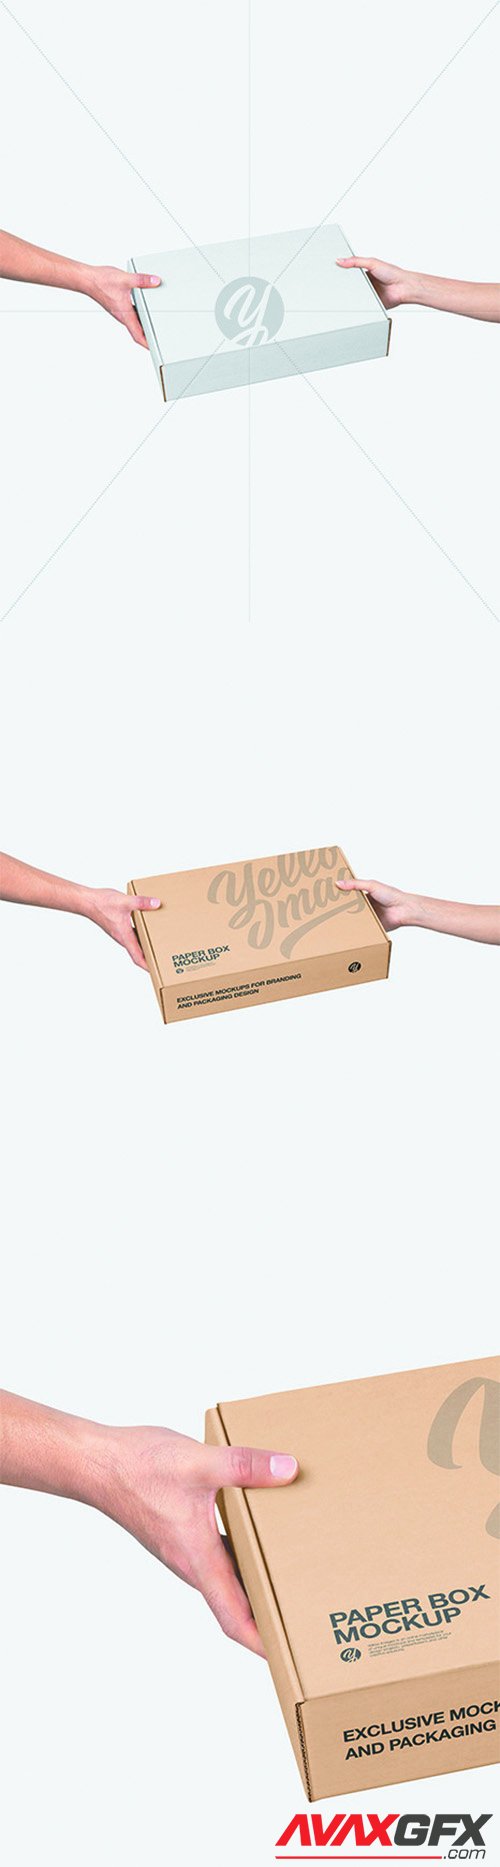 Mailing Box in Hands Mockup 66109